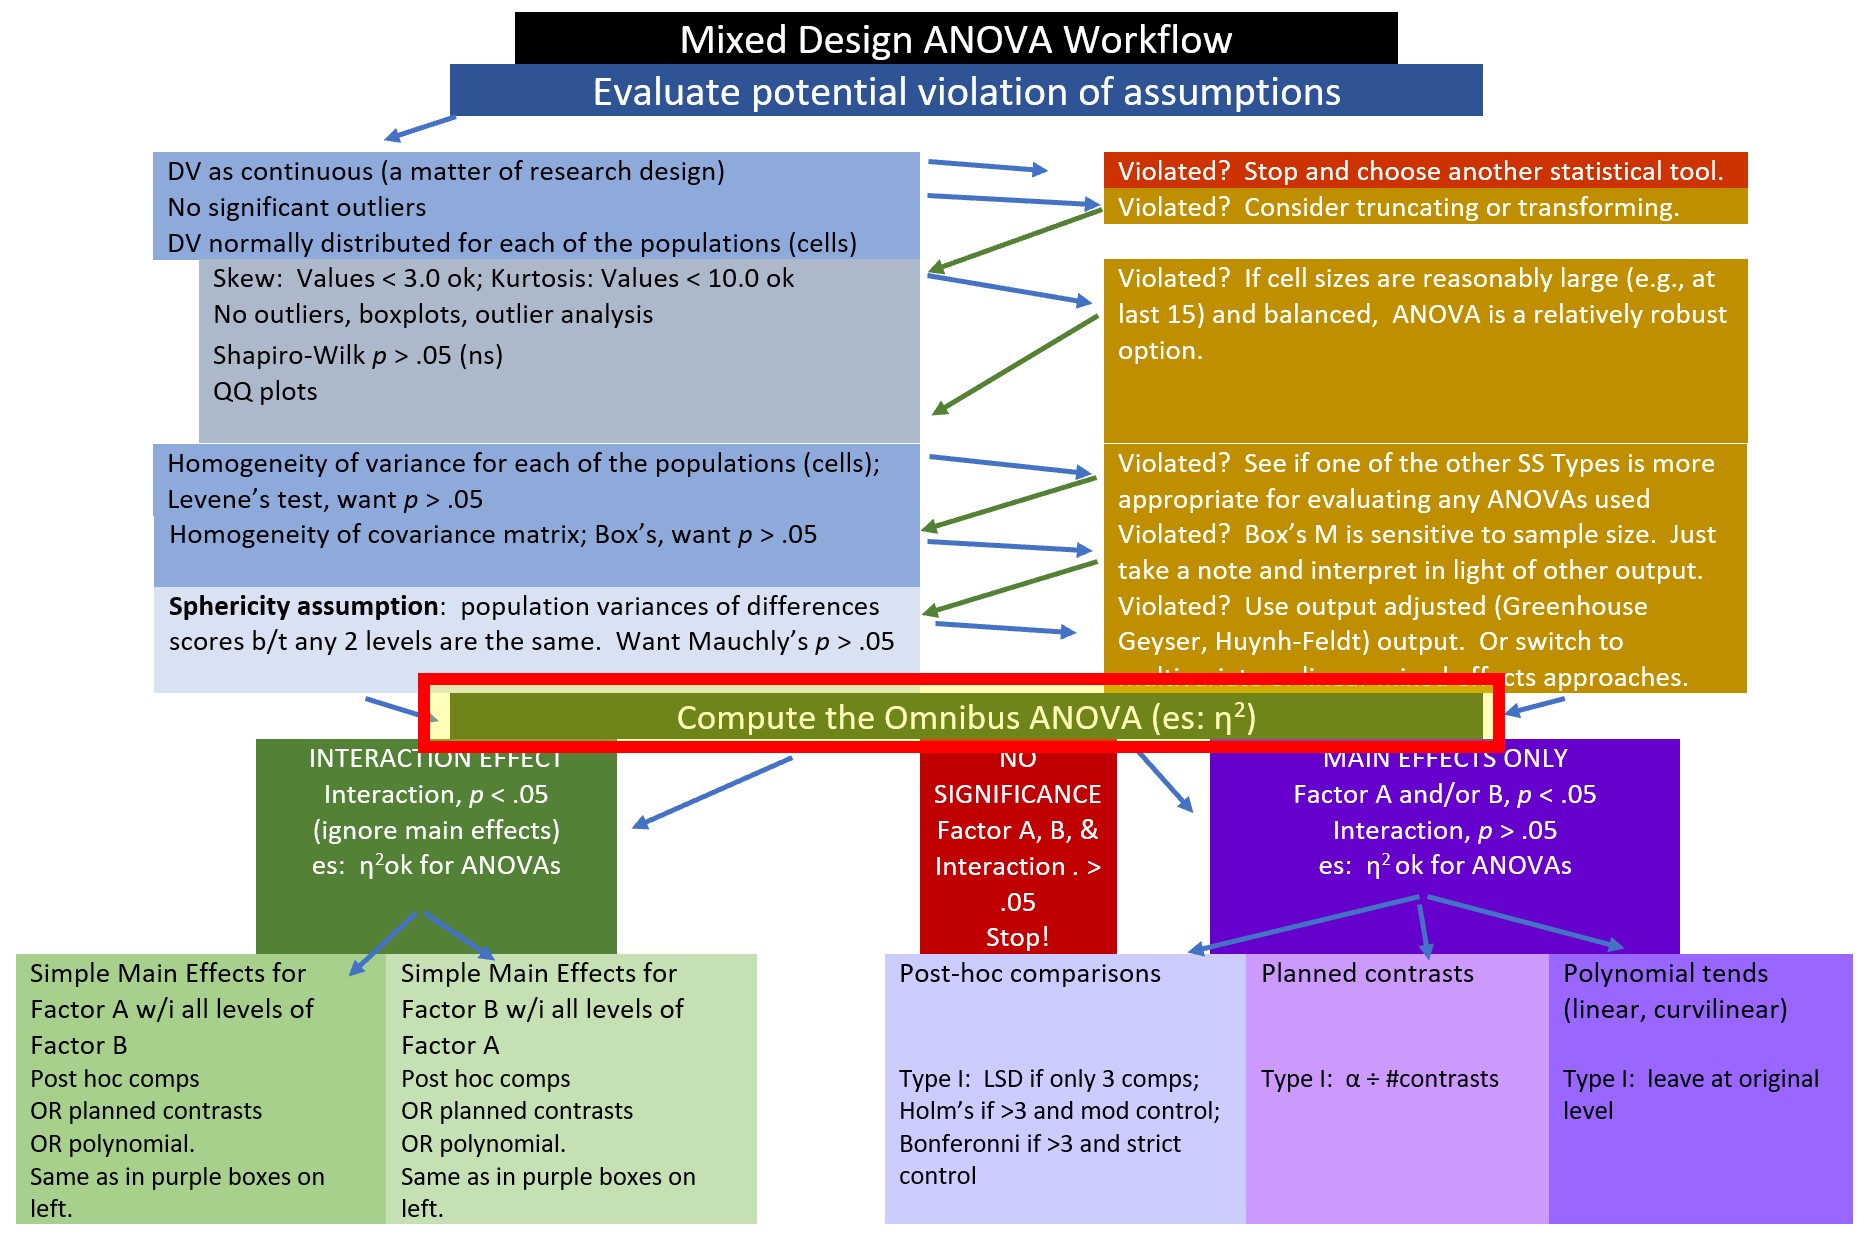 Image of the workflow showing that we at the “Compute the Omnibus ANOVA” step